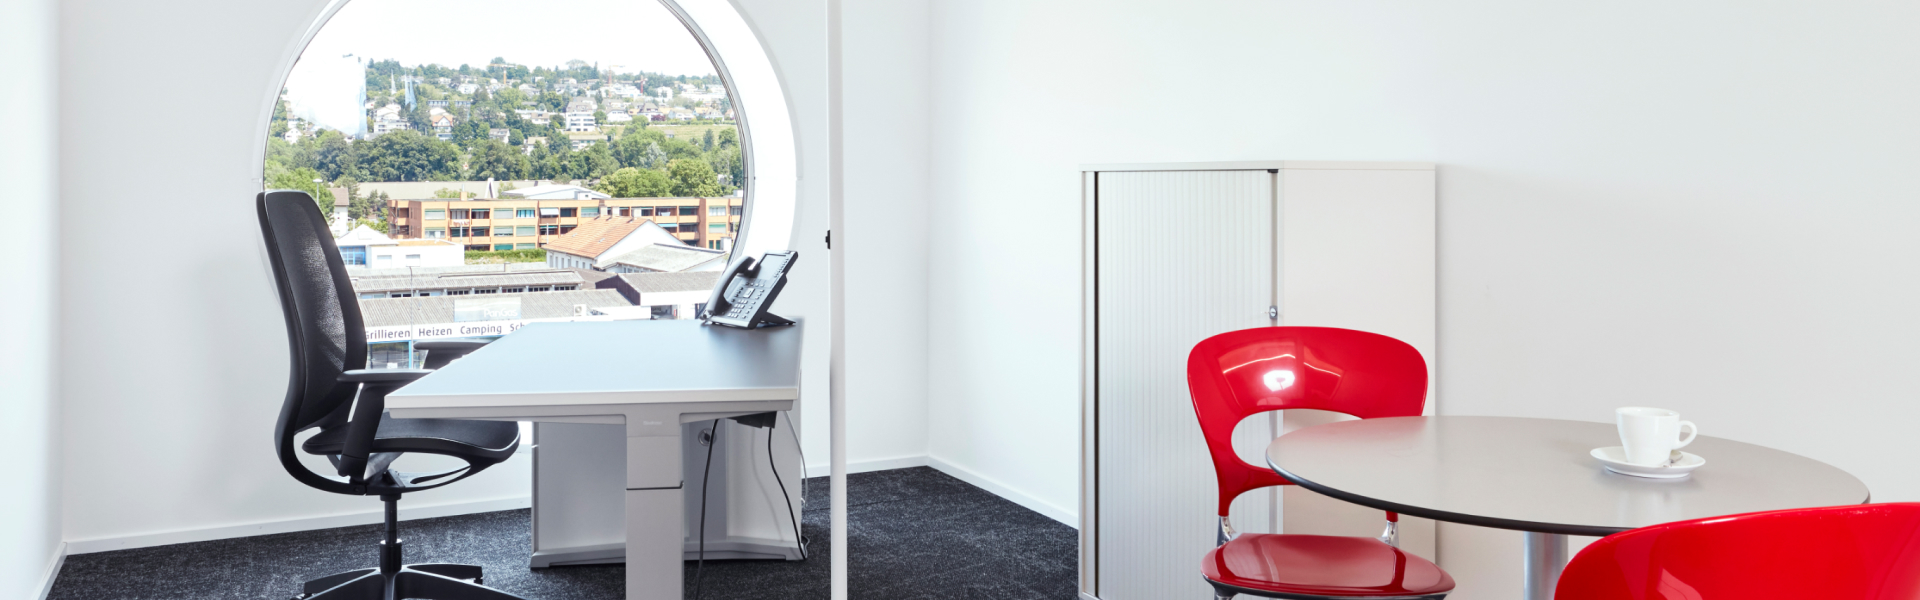 Rent a single office in Zurich - furnished small office space